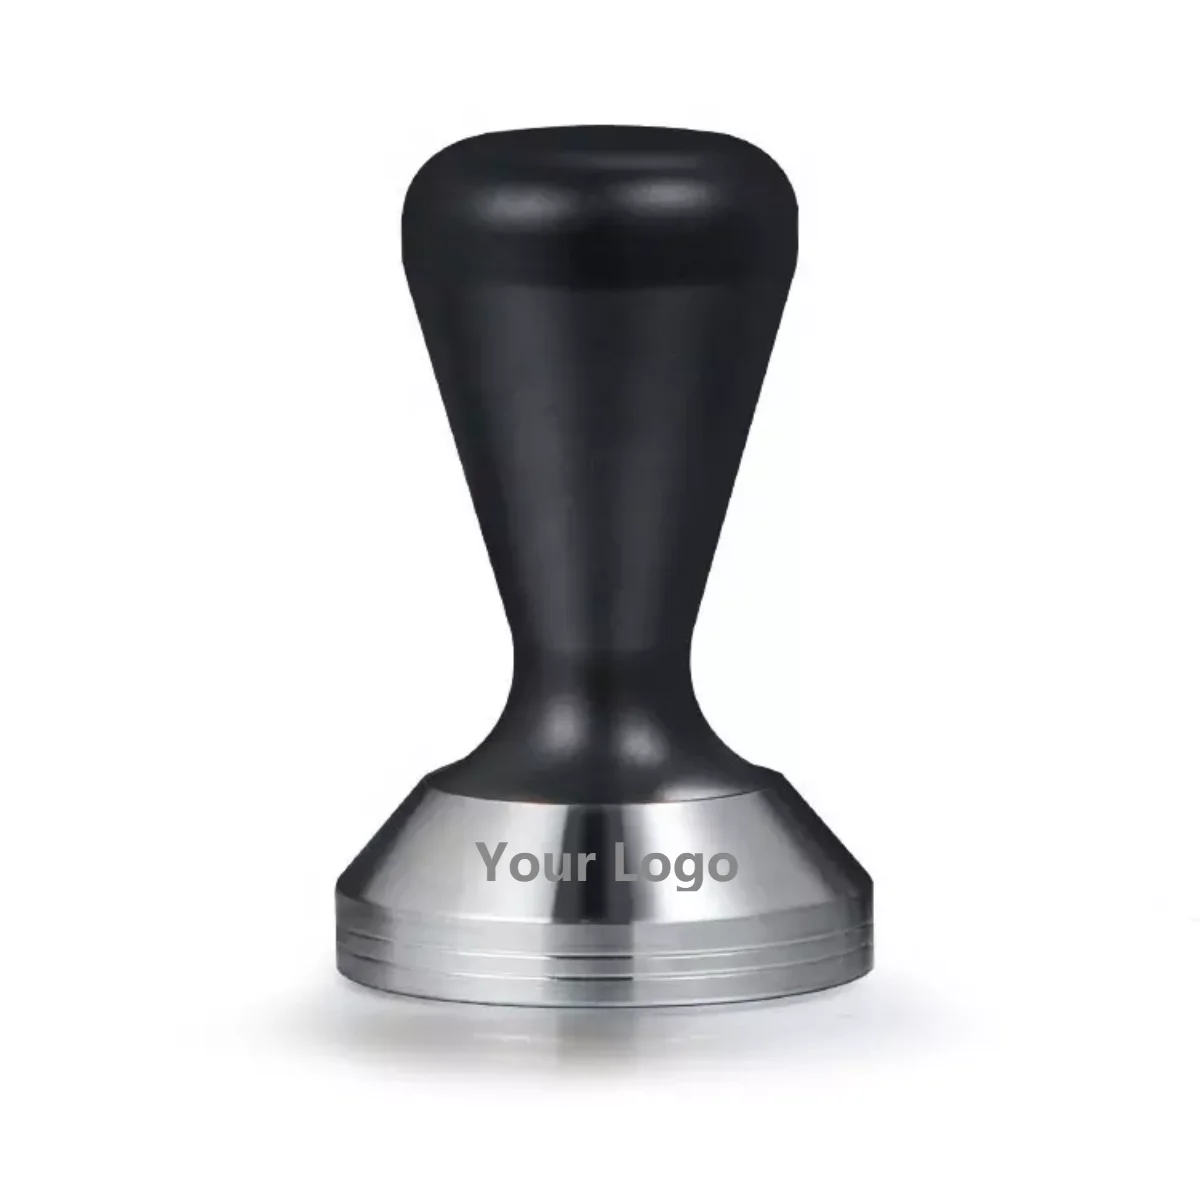 #1 51mm Coffee Tamper Stainless Steel Rustproof Barista Espresso Tampers Coffee Bean Pressing Tool Solid Sturdy Base Espresso Distributor for Home DIY Cafe Supplies 